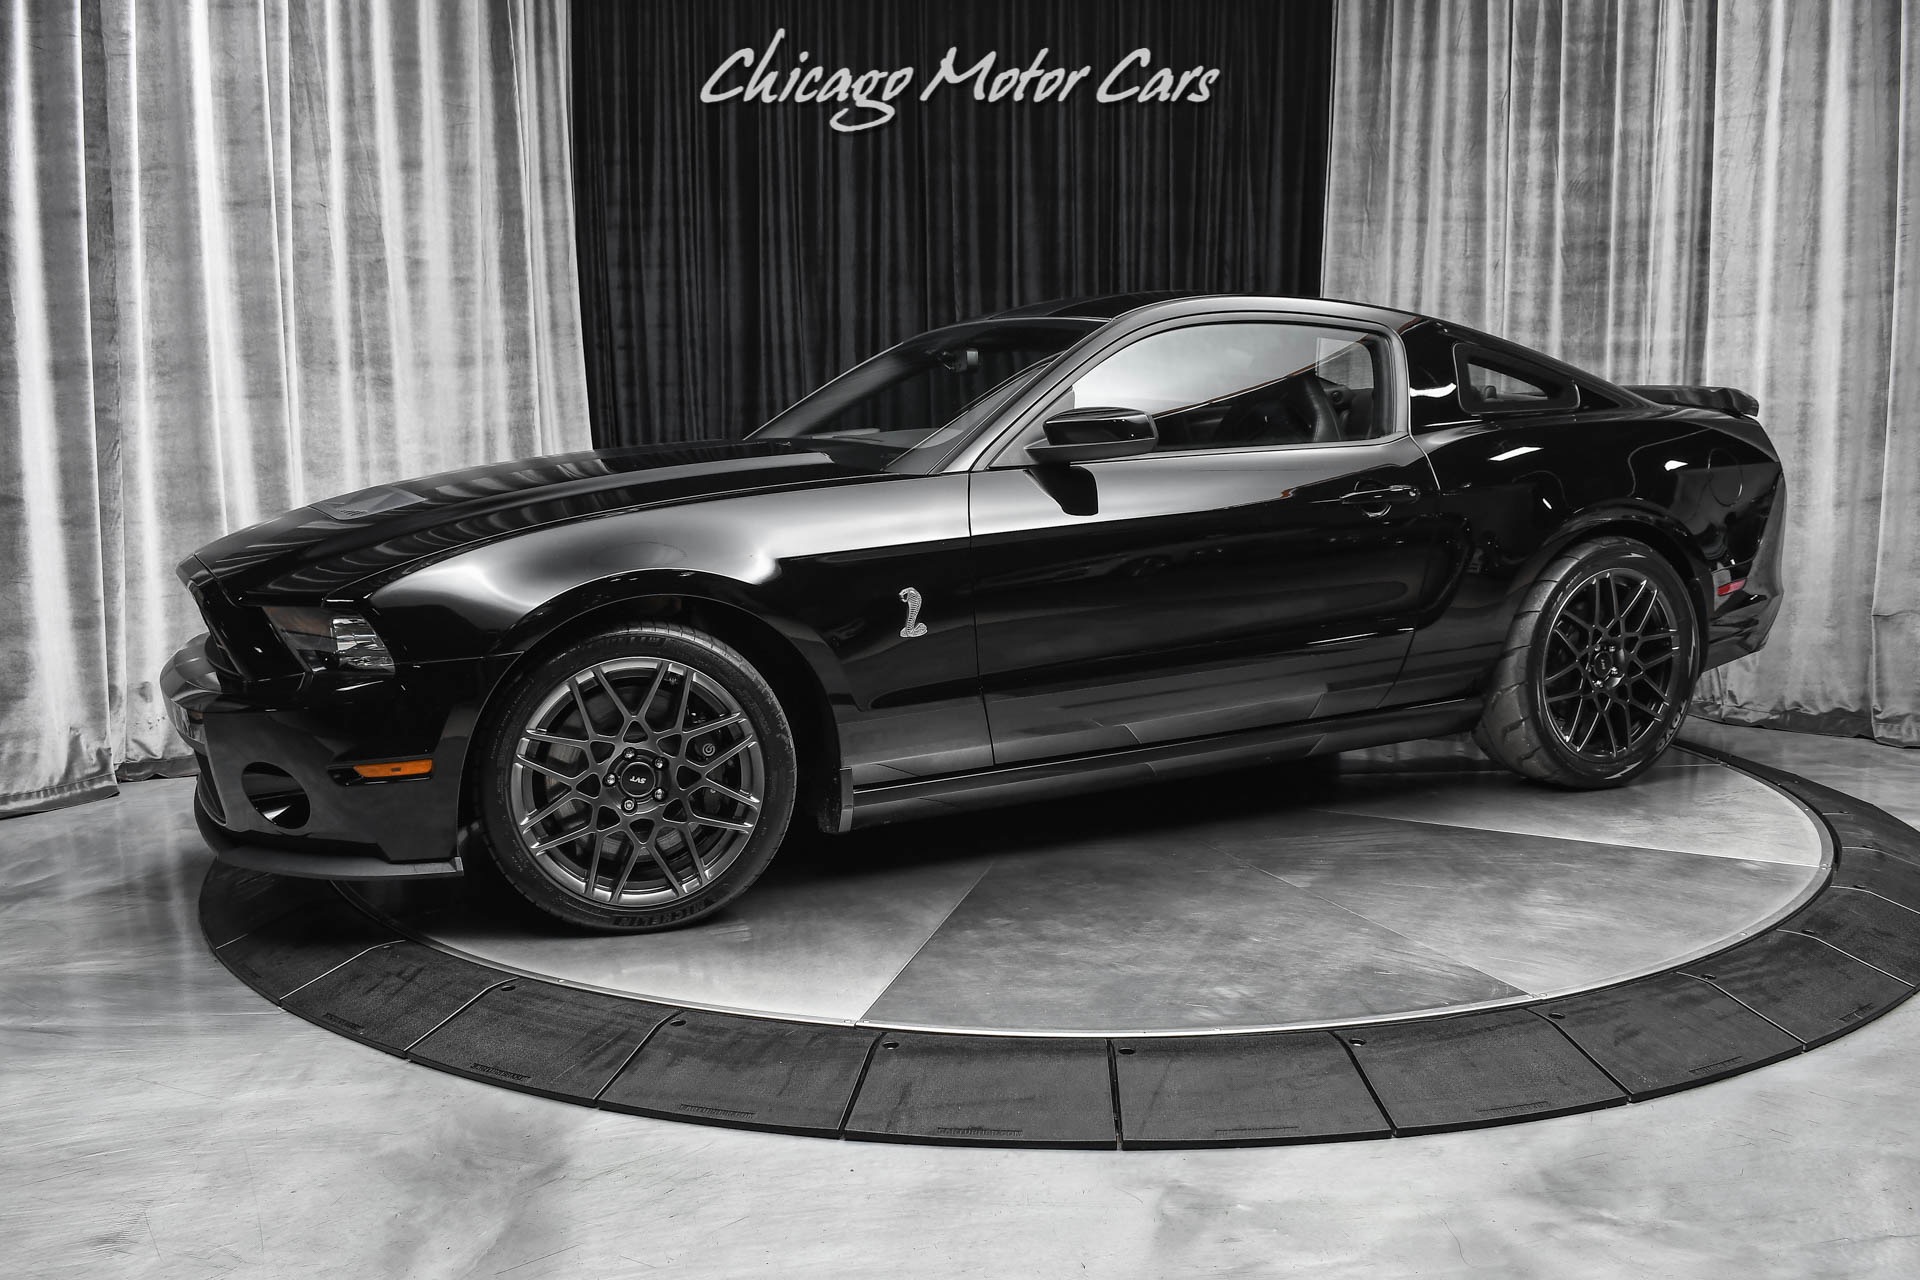 Used-2013-Ford-Shelby-GT500-58L-Built-Motor-907HP-6-Speed-Manual-Huge-Upgrades